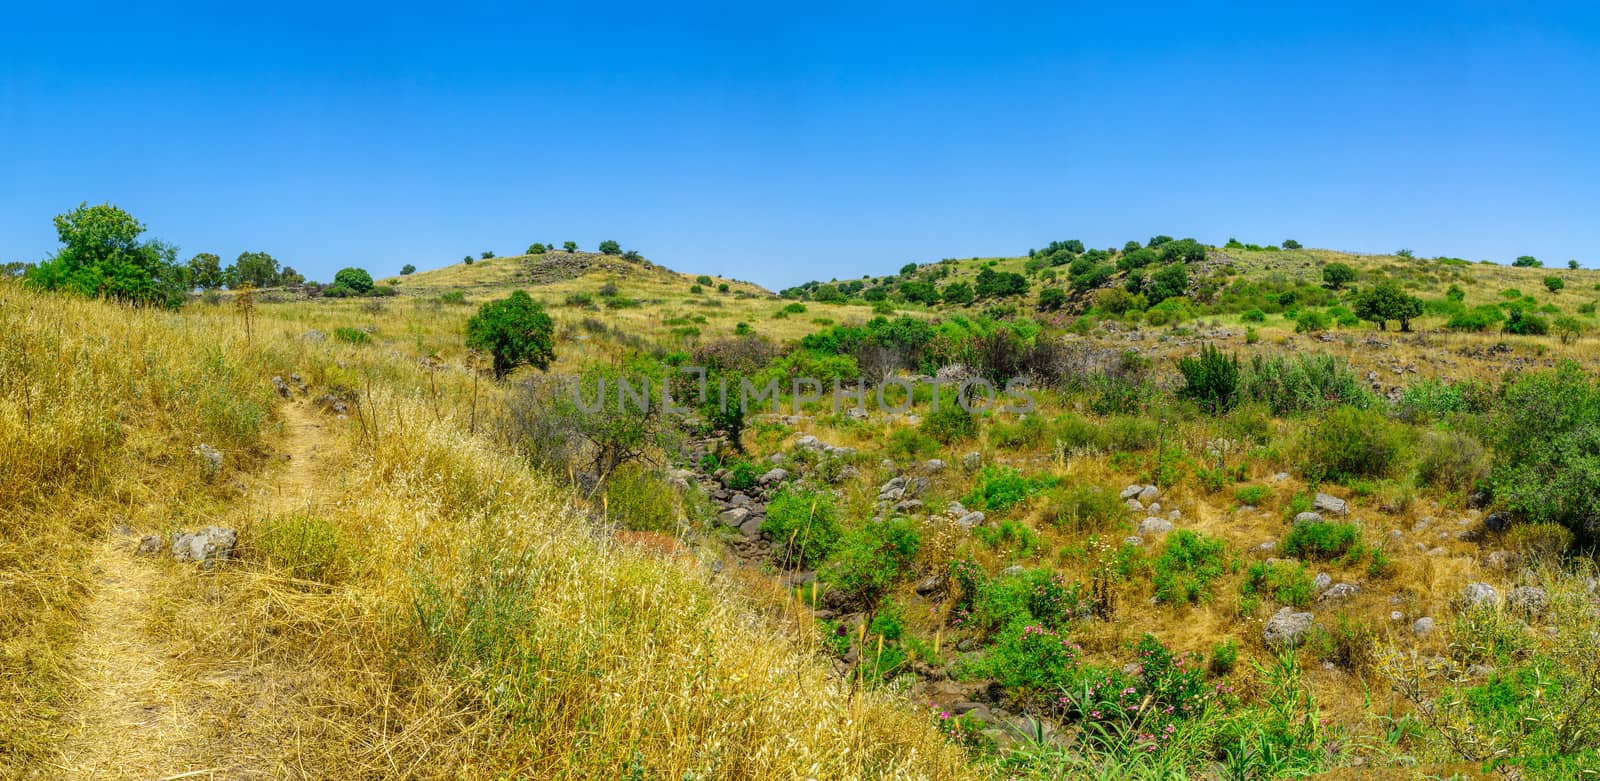 Panoramic view of Landscape along the Zavitan Stream, in Yehudiya Forest Nature Reserve, the Golan Heights, Northern Israel